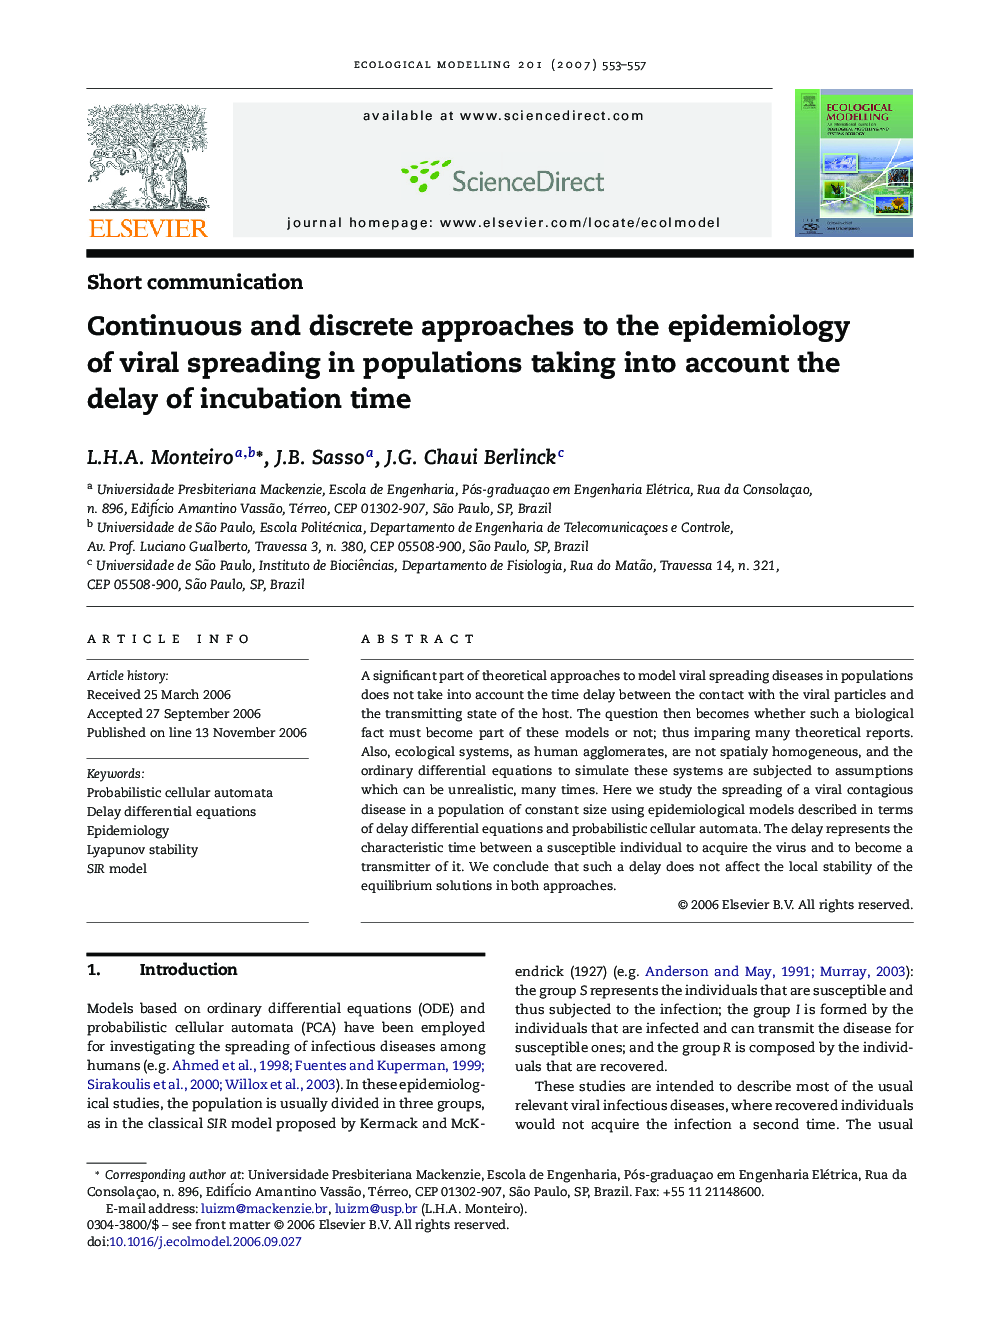 Continuous and discrete approaches to the epidemiology of viral spreading in populations taking into account the delay of incubation time